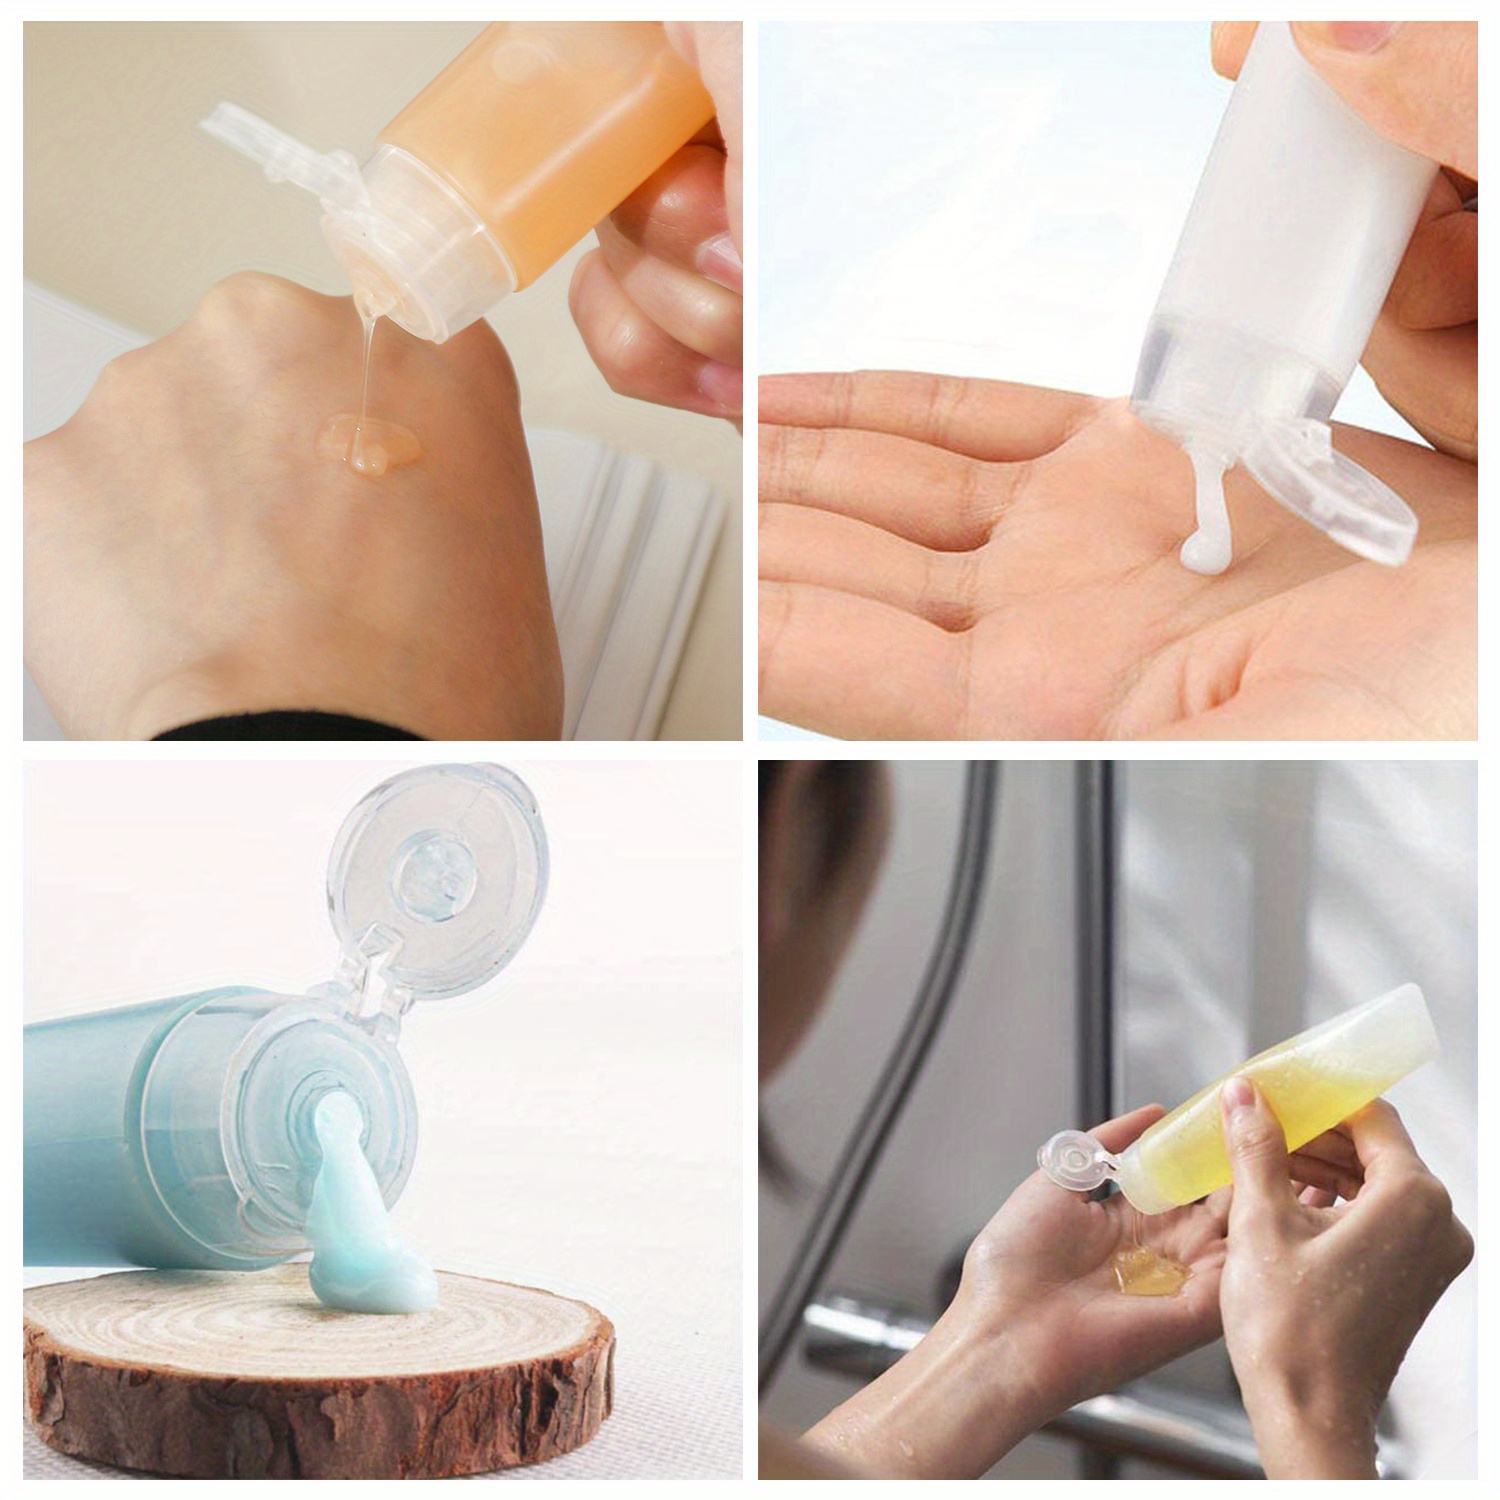 Travel Size Toiletries with Bag for Liquids Leak-Proof Approved Carry-on  for Airplane for Shampoo Conditioner Lotion Body Wash - AliExpress